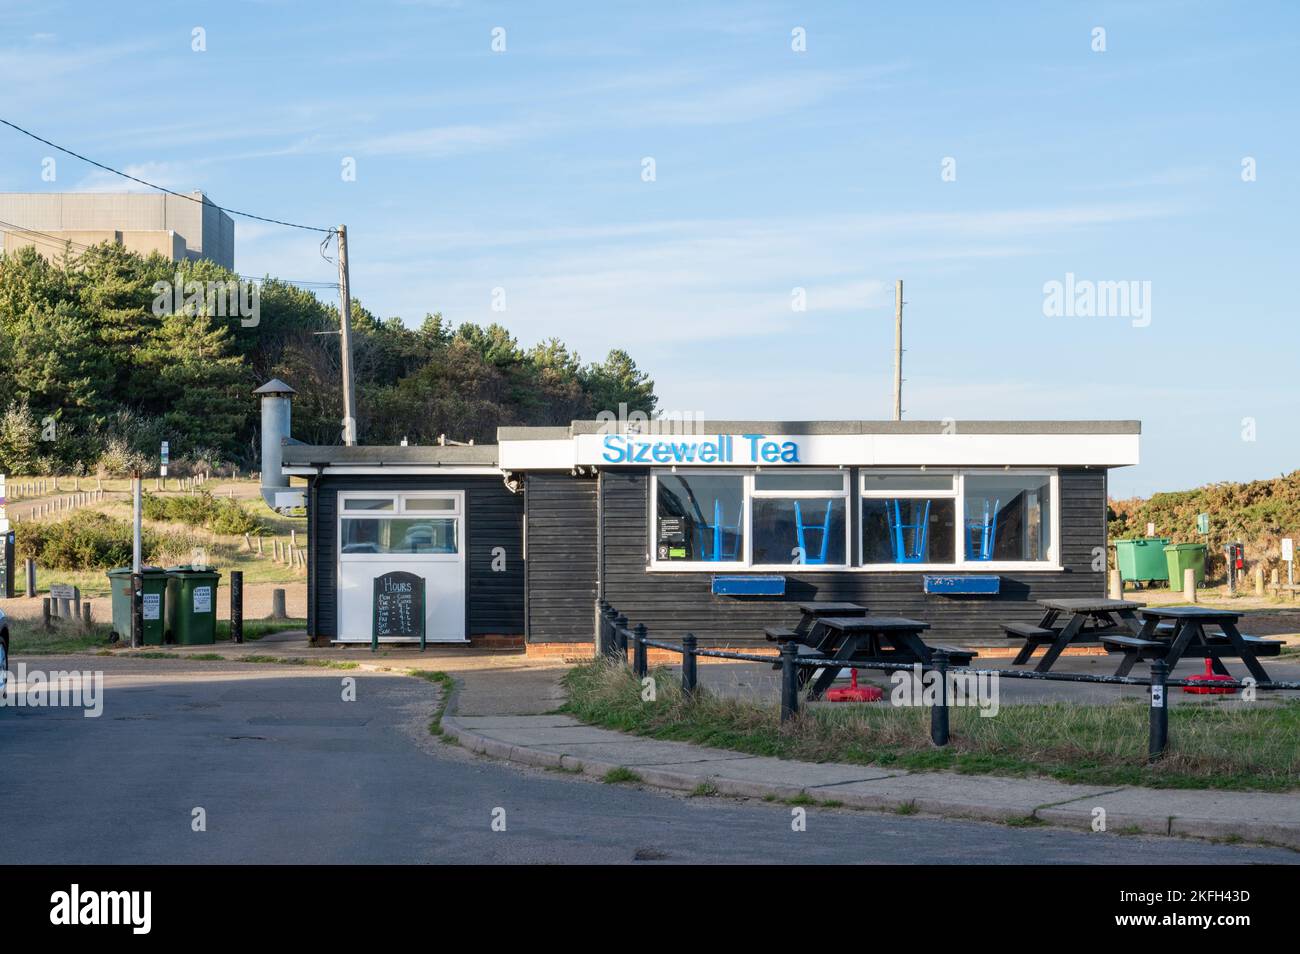 The Sizewell Tea cafe and snack bar on the beach next to Sizewell B nuclear power station Suffolk UK, Stock Photo